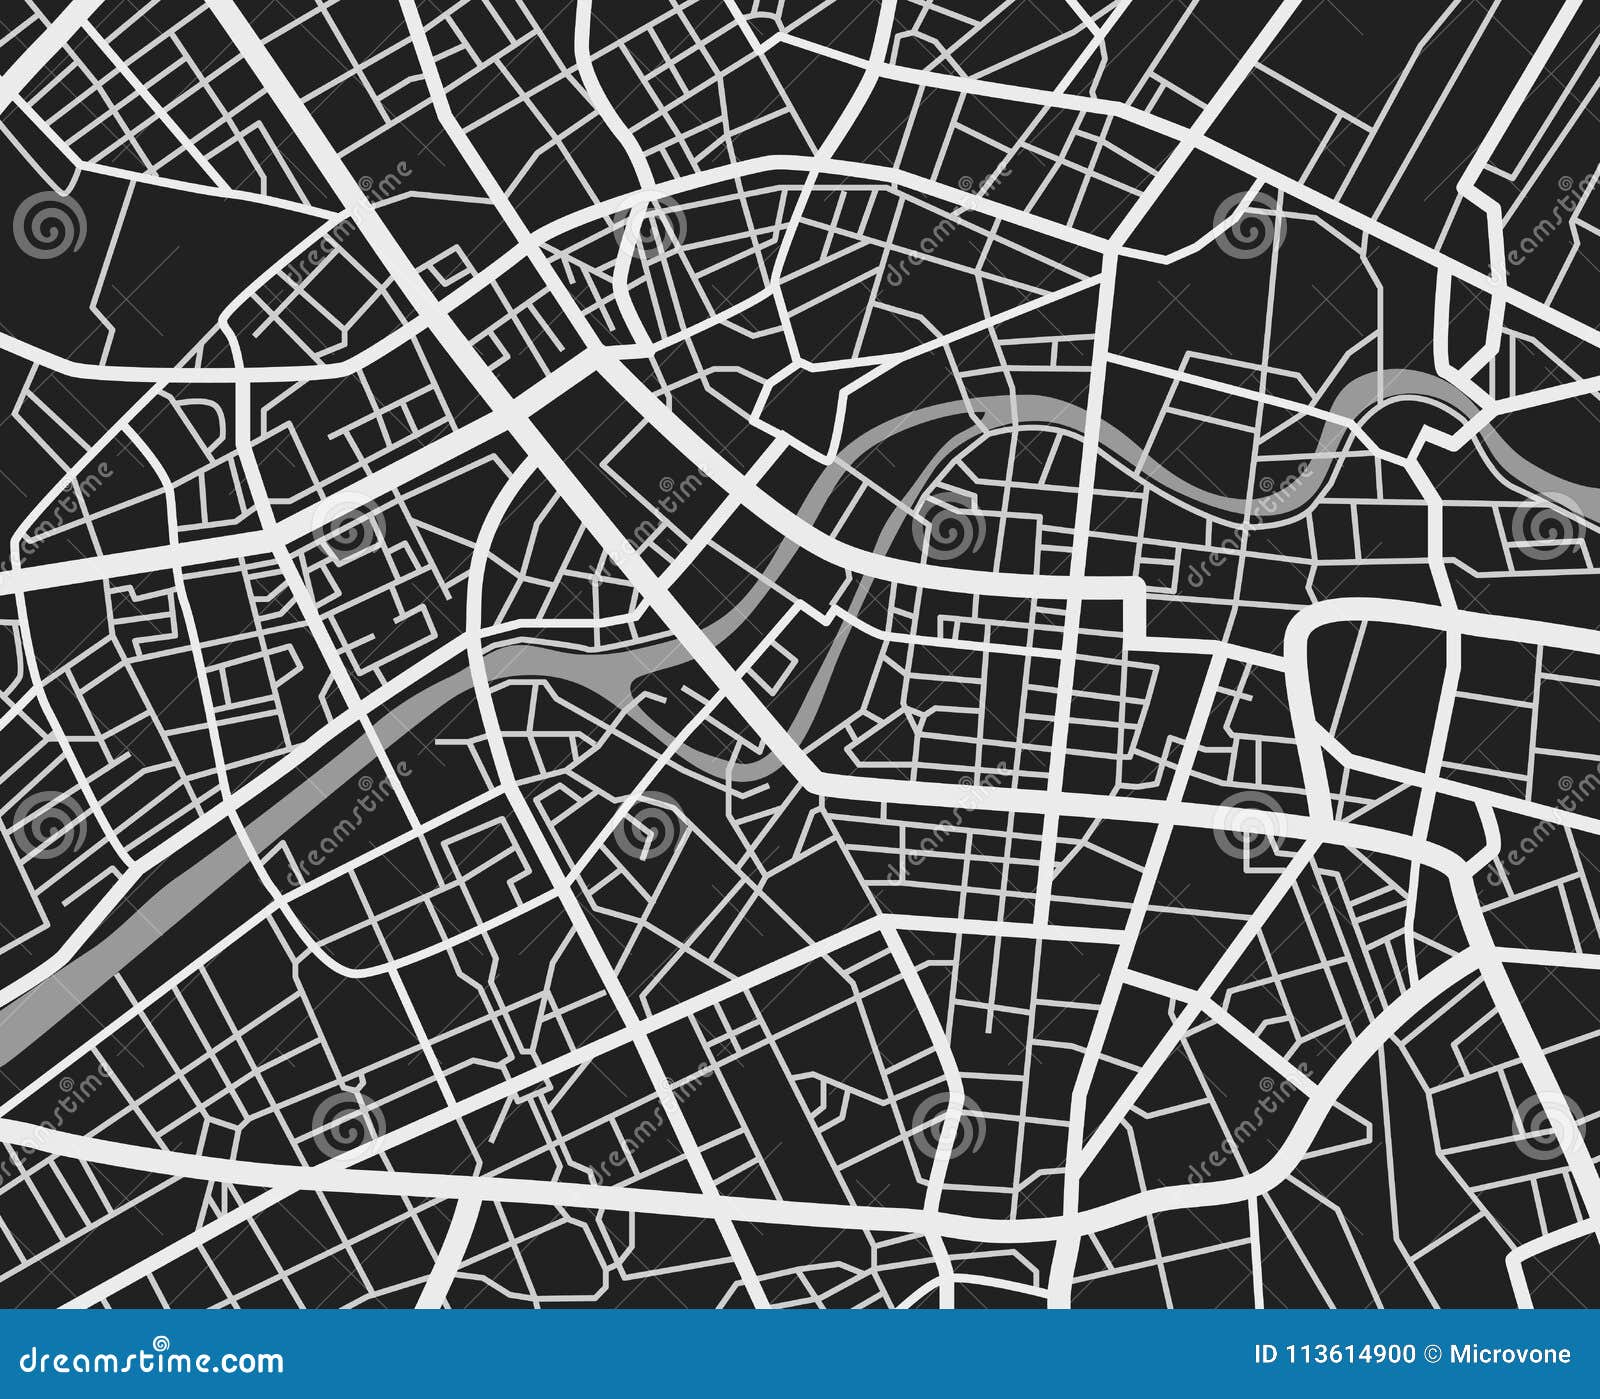 black and white travel city map. urban transport roads  cartography background